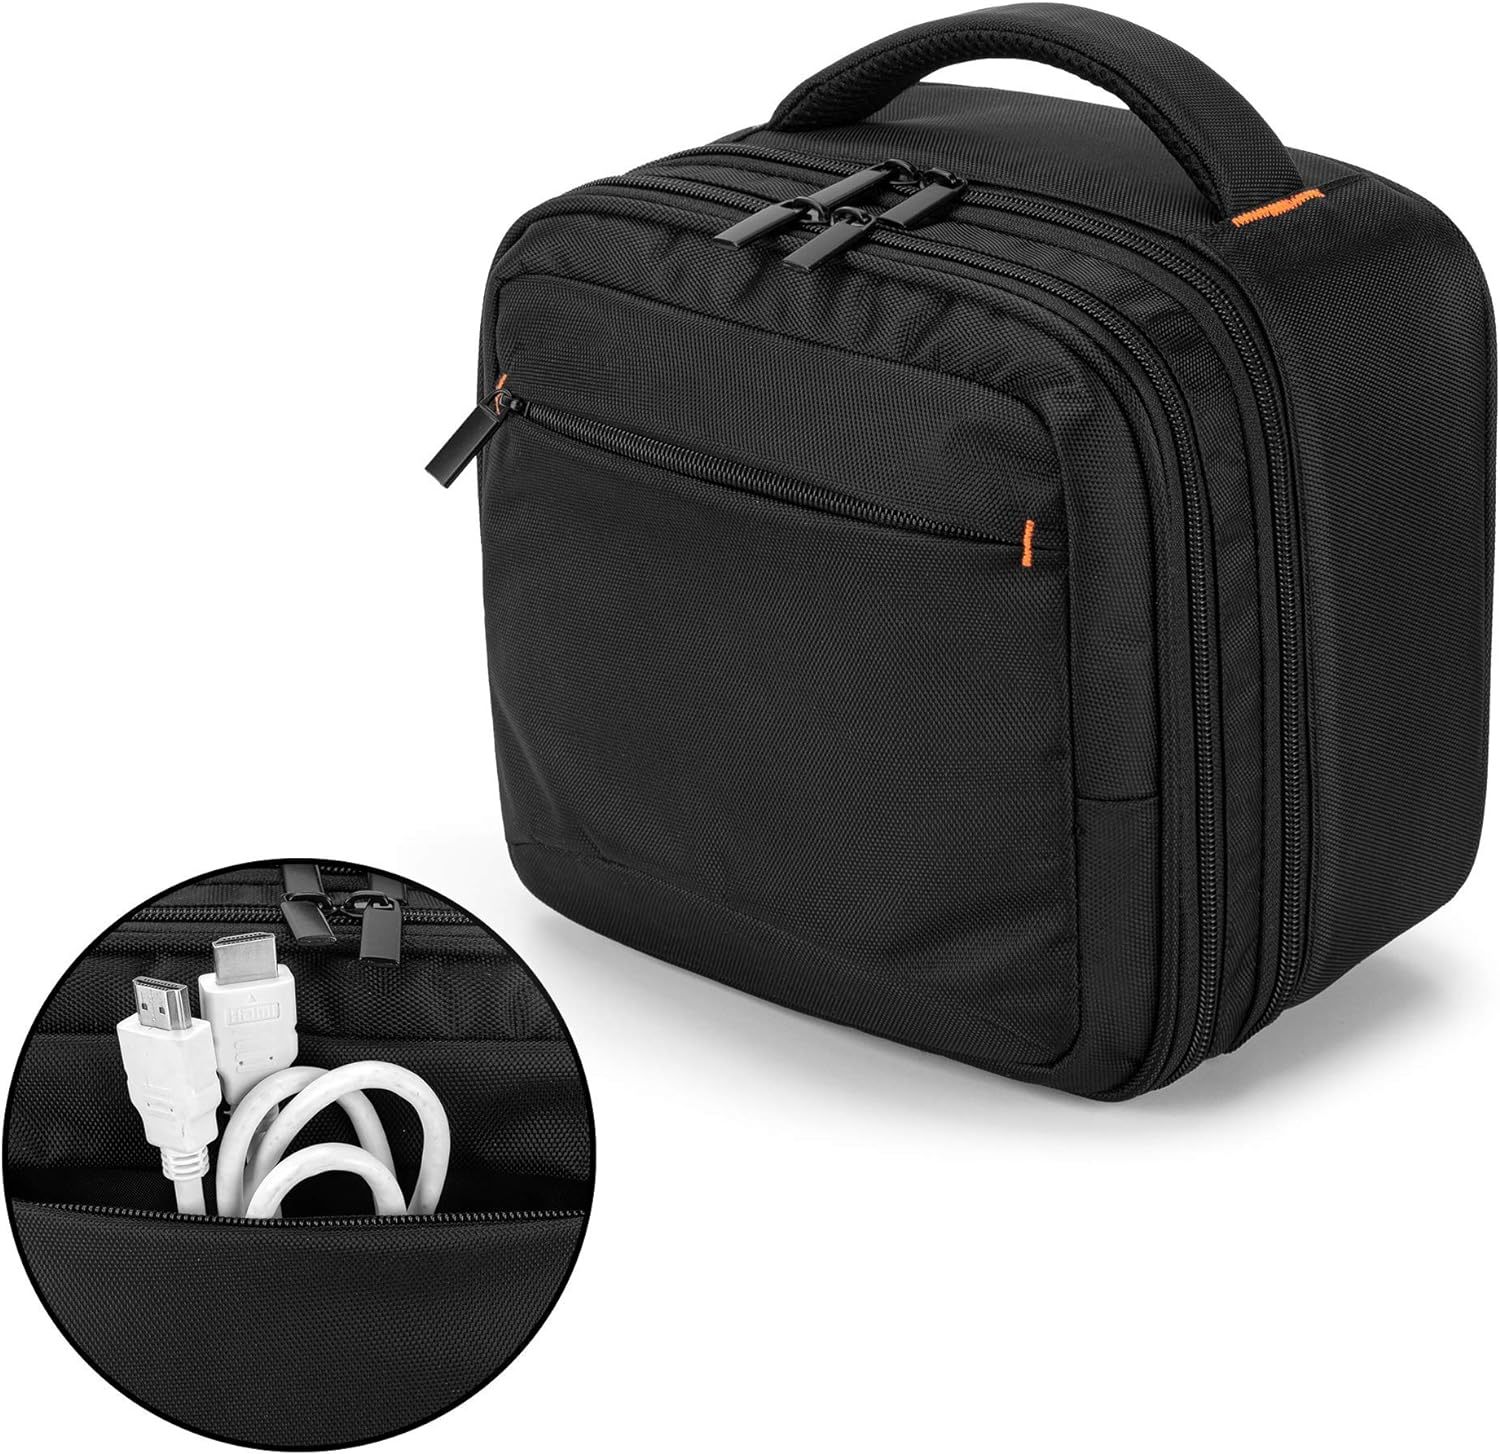  Boczif Projector Carrying Case, Projector Bag